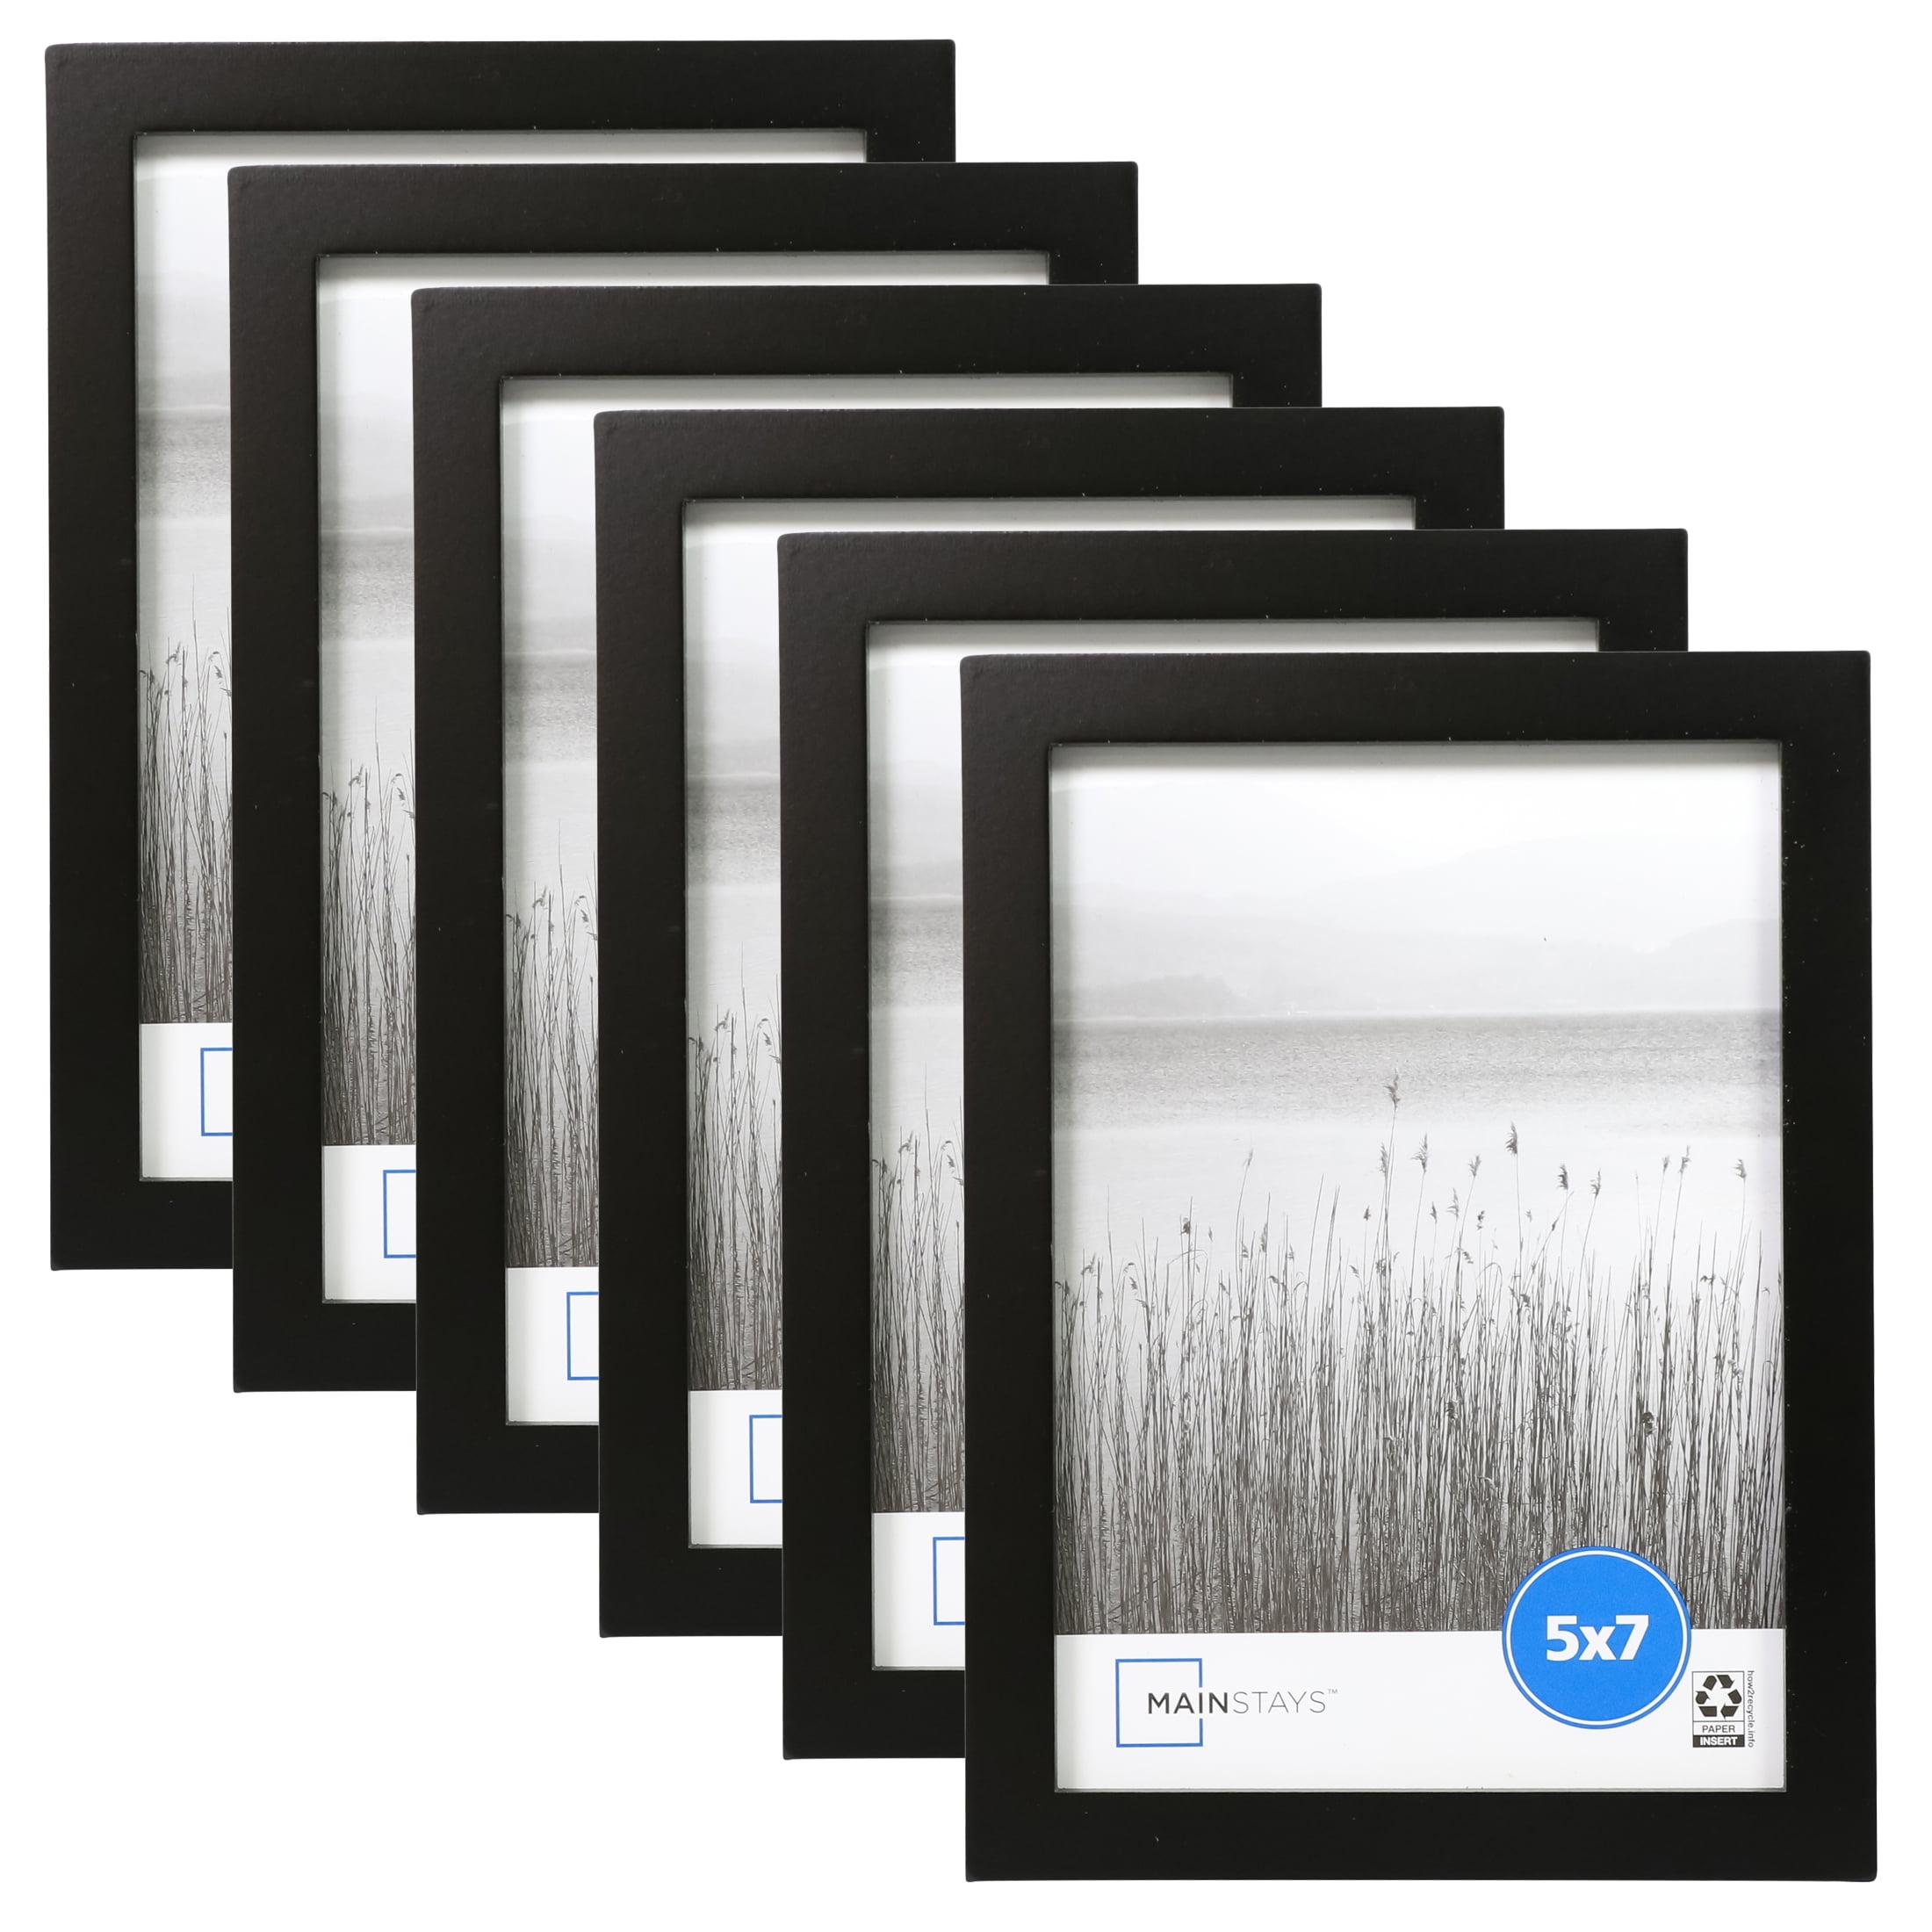 Mainstays 11x14 Matted to 8x10 Linear Gallery Wall Picture Frame, Rustic  Gray - Walmart.com